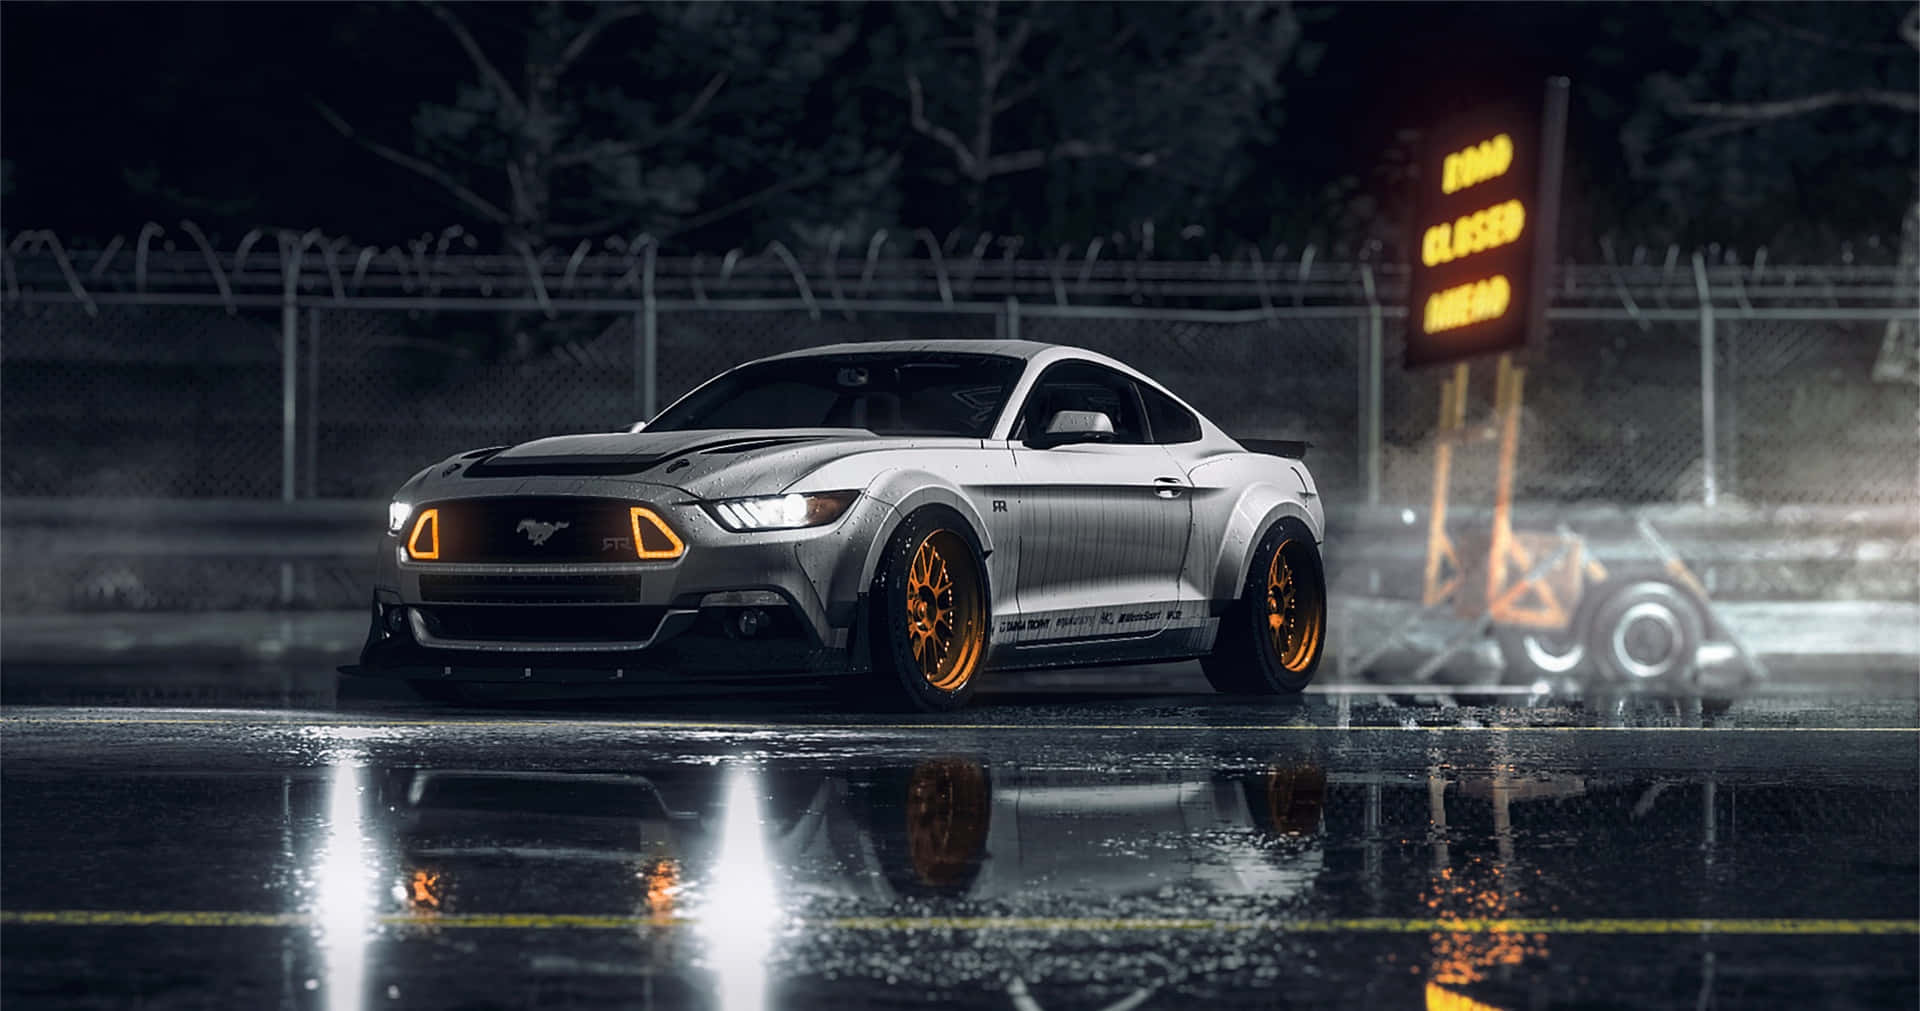 High Octane Adventure - Need for Speed PC Action Wallpaper